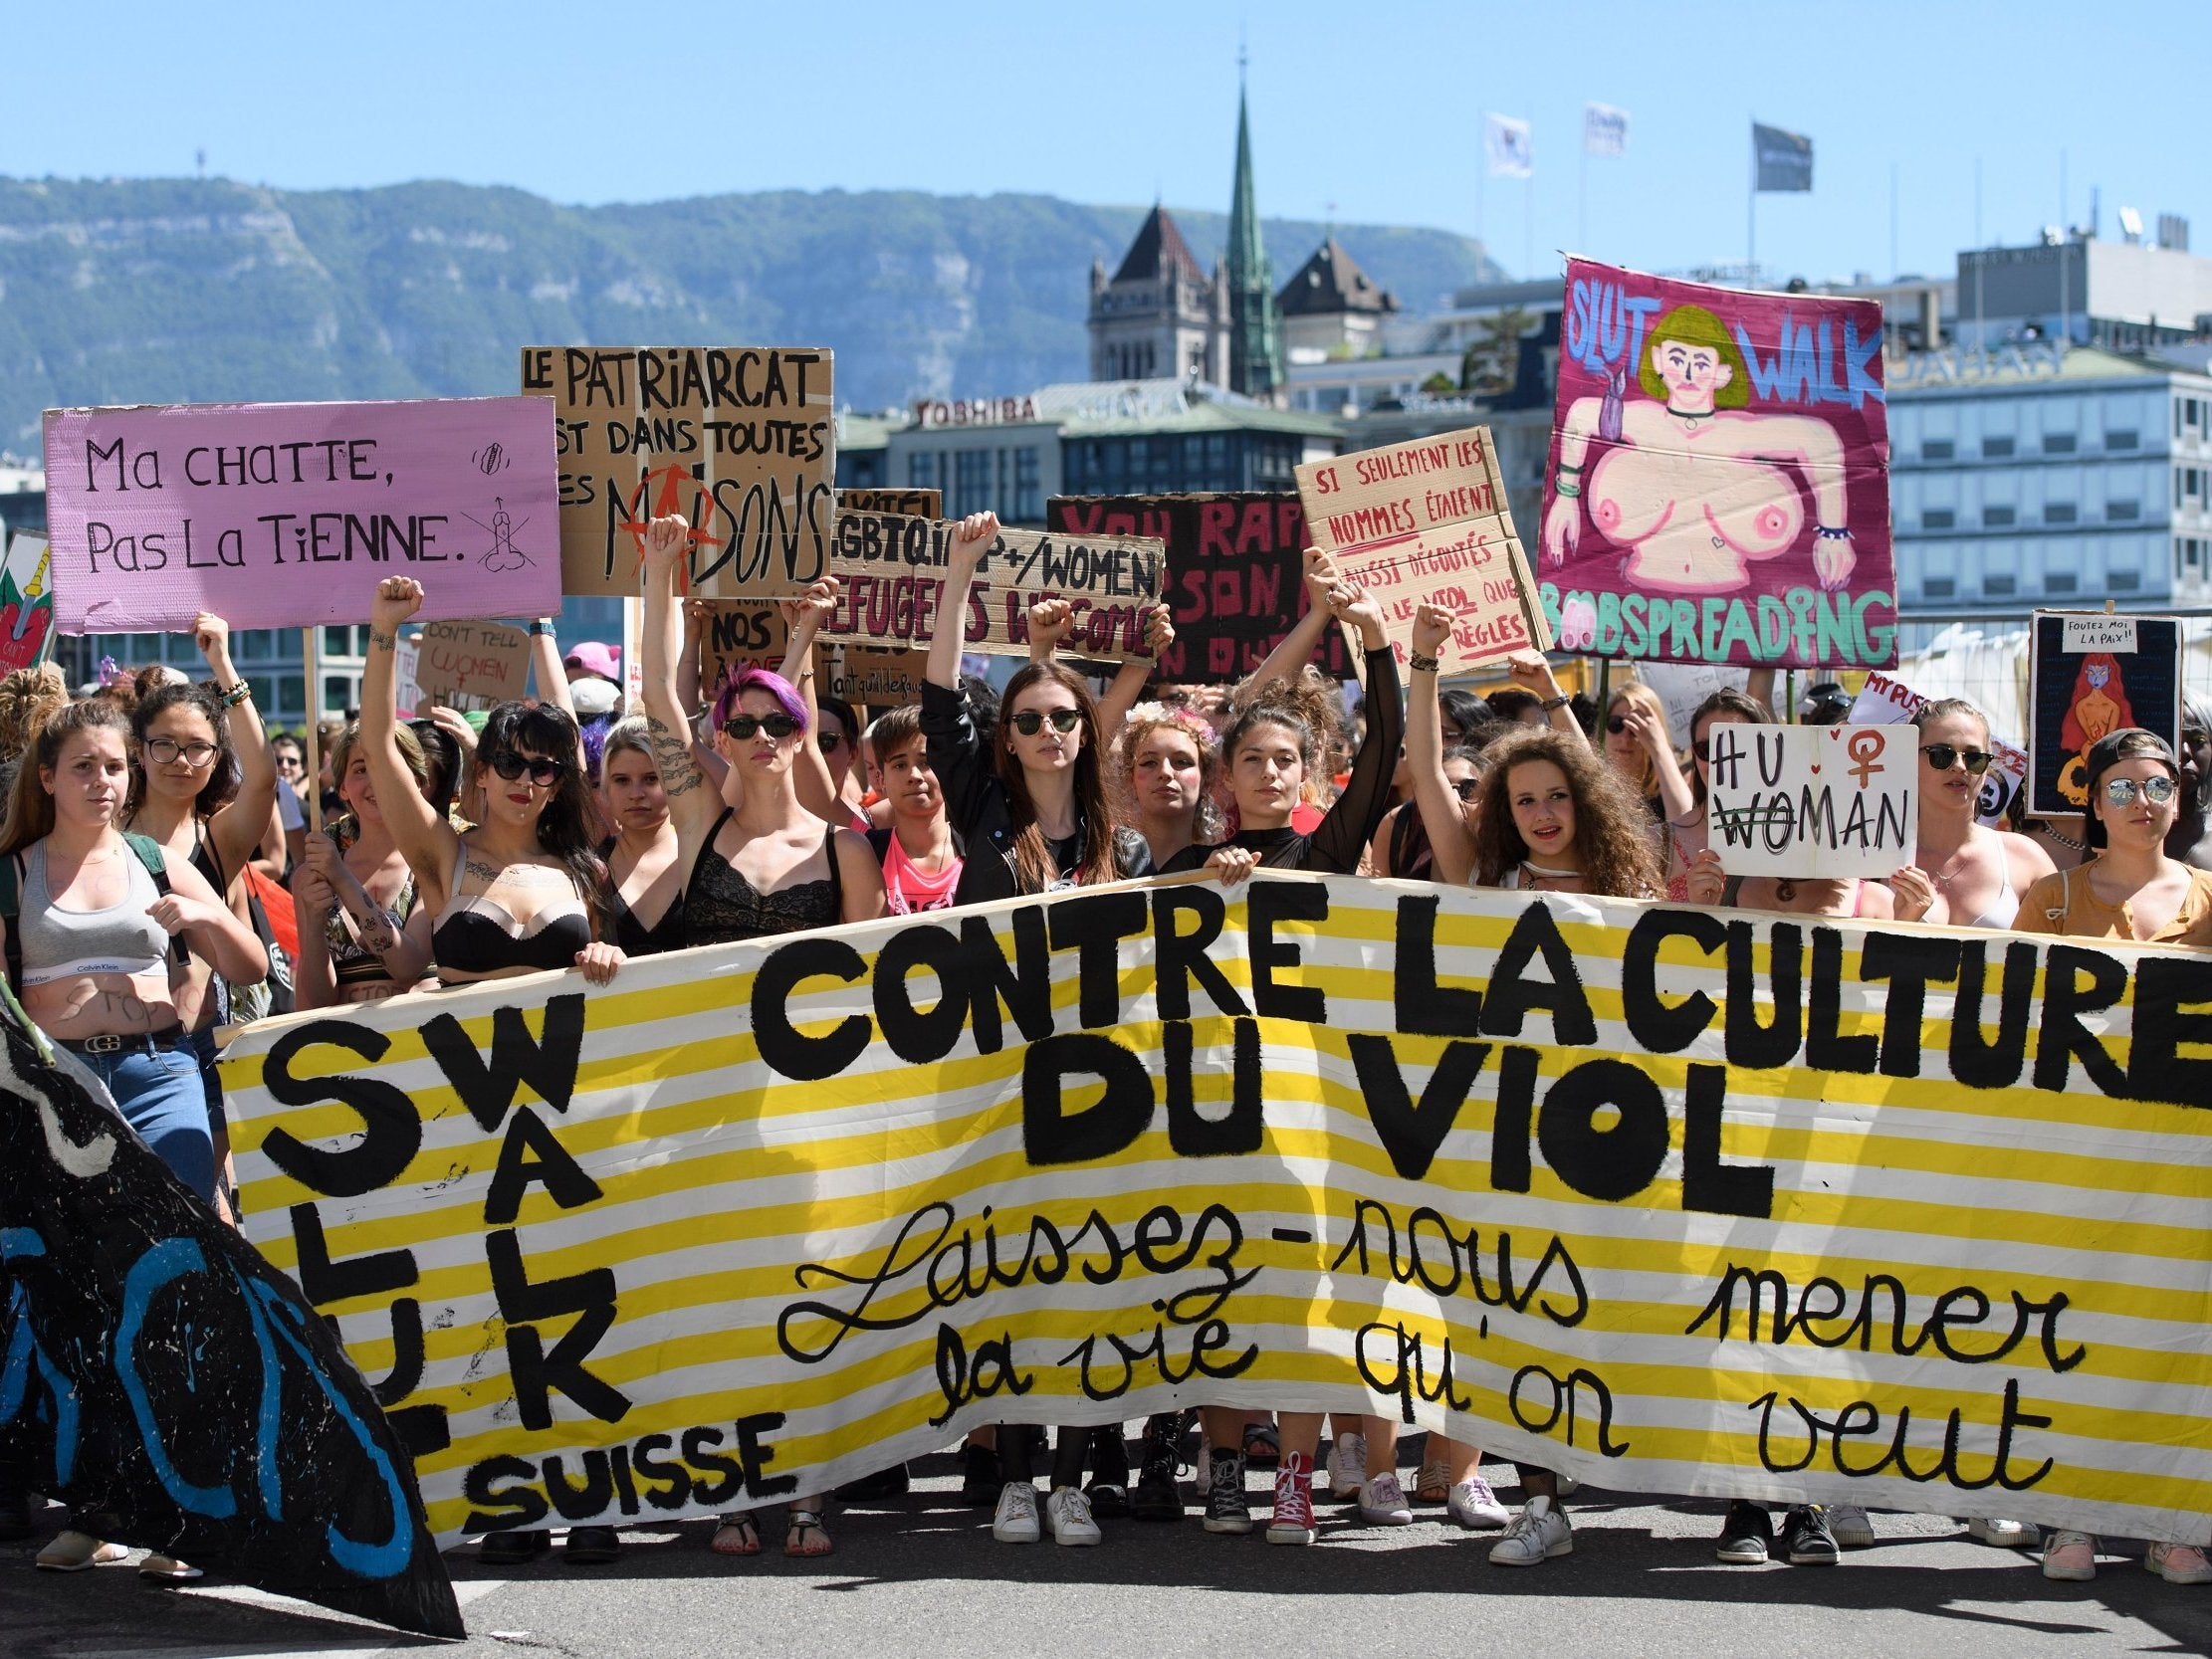 Dangerous Rape And Sex - Rape and sexual violence levels 'staggeringly high' in Switzerland ...